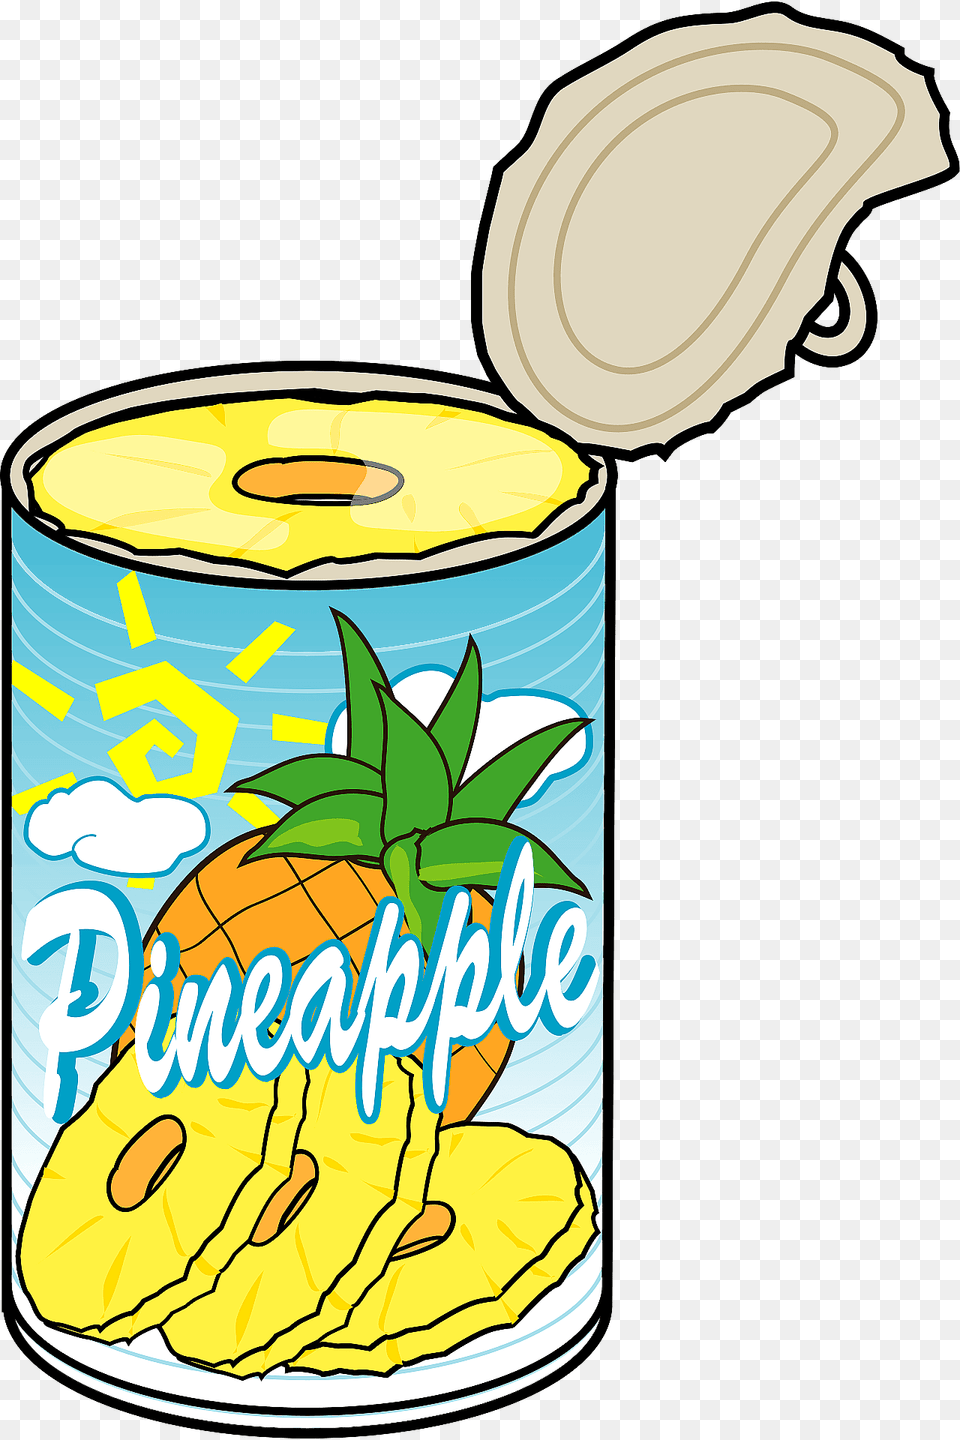 Canned Pineapple Slices Clipart, Aluminium, Tin, Can, Canned Goods Png